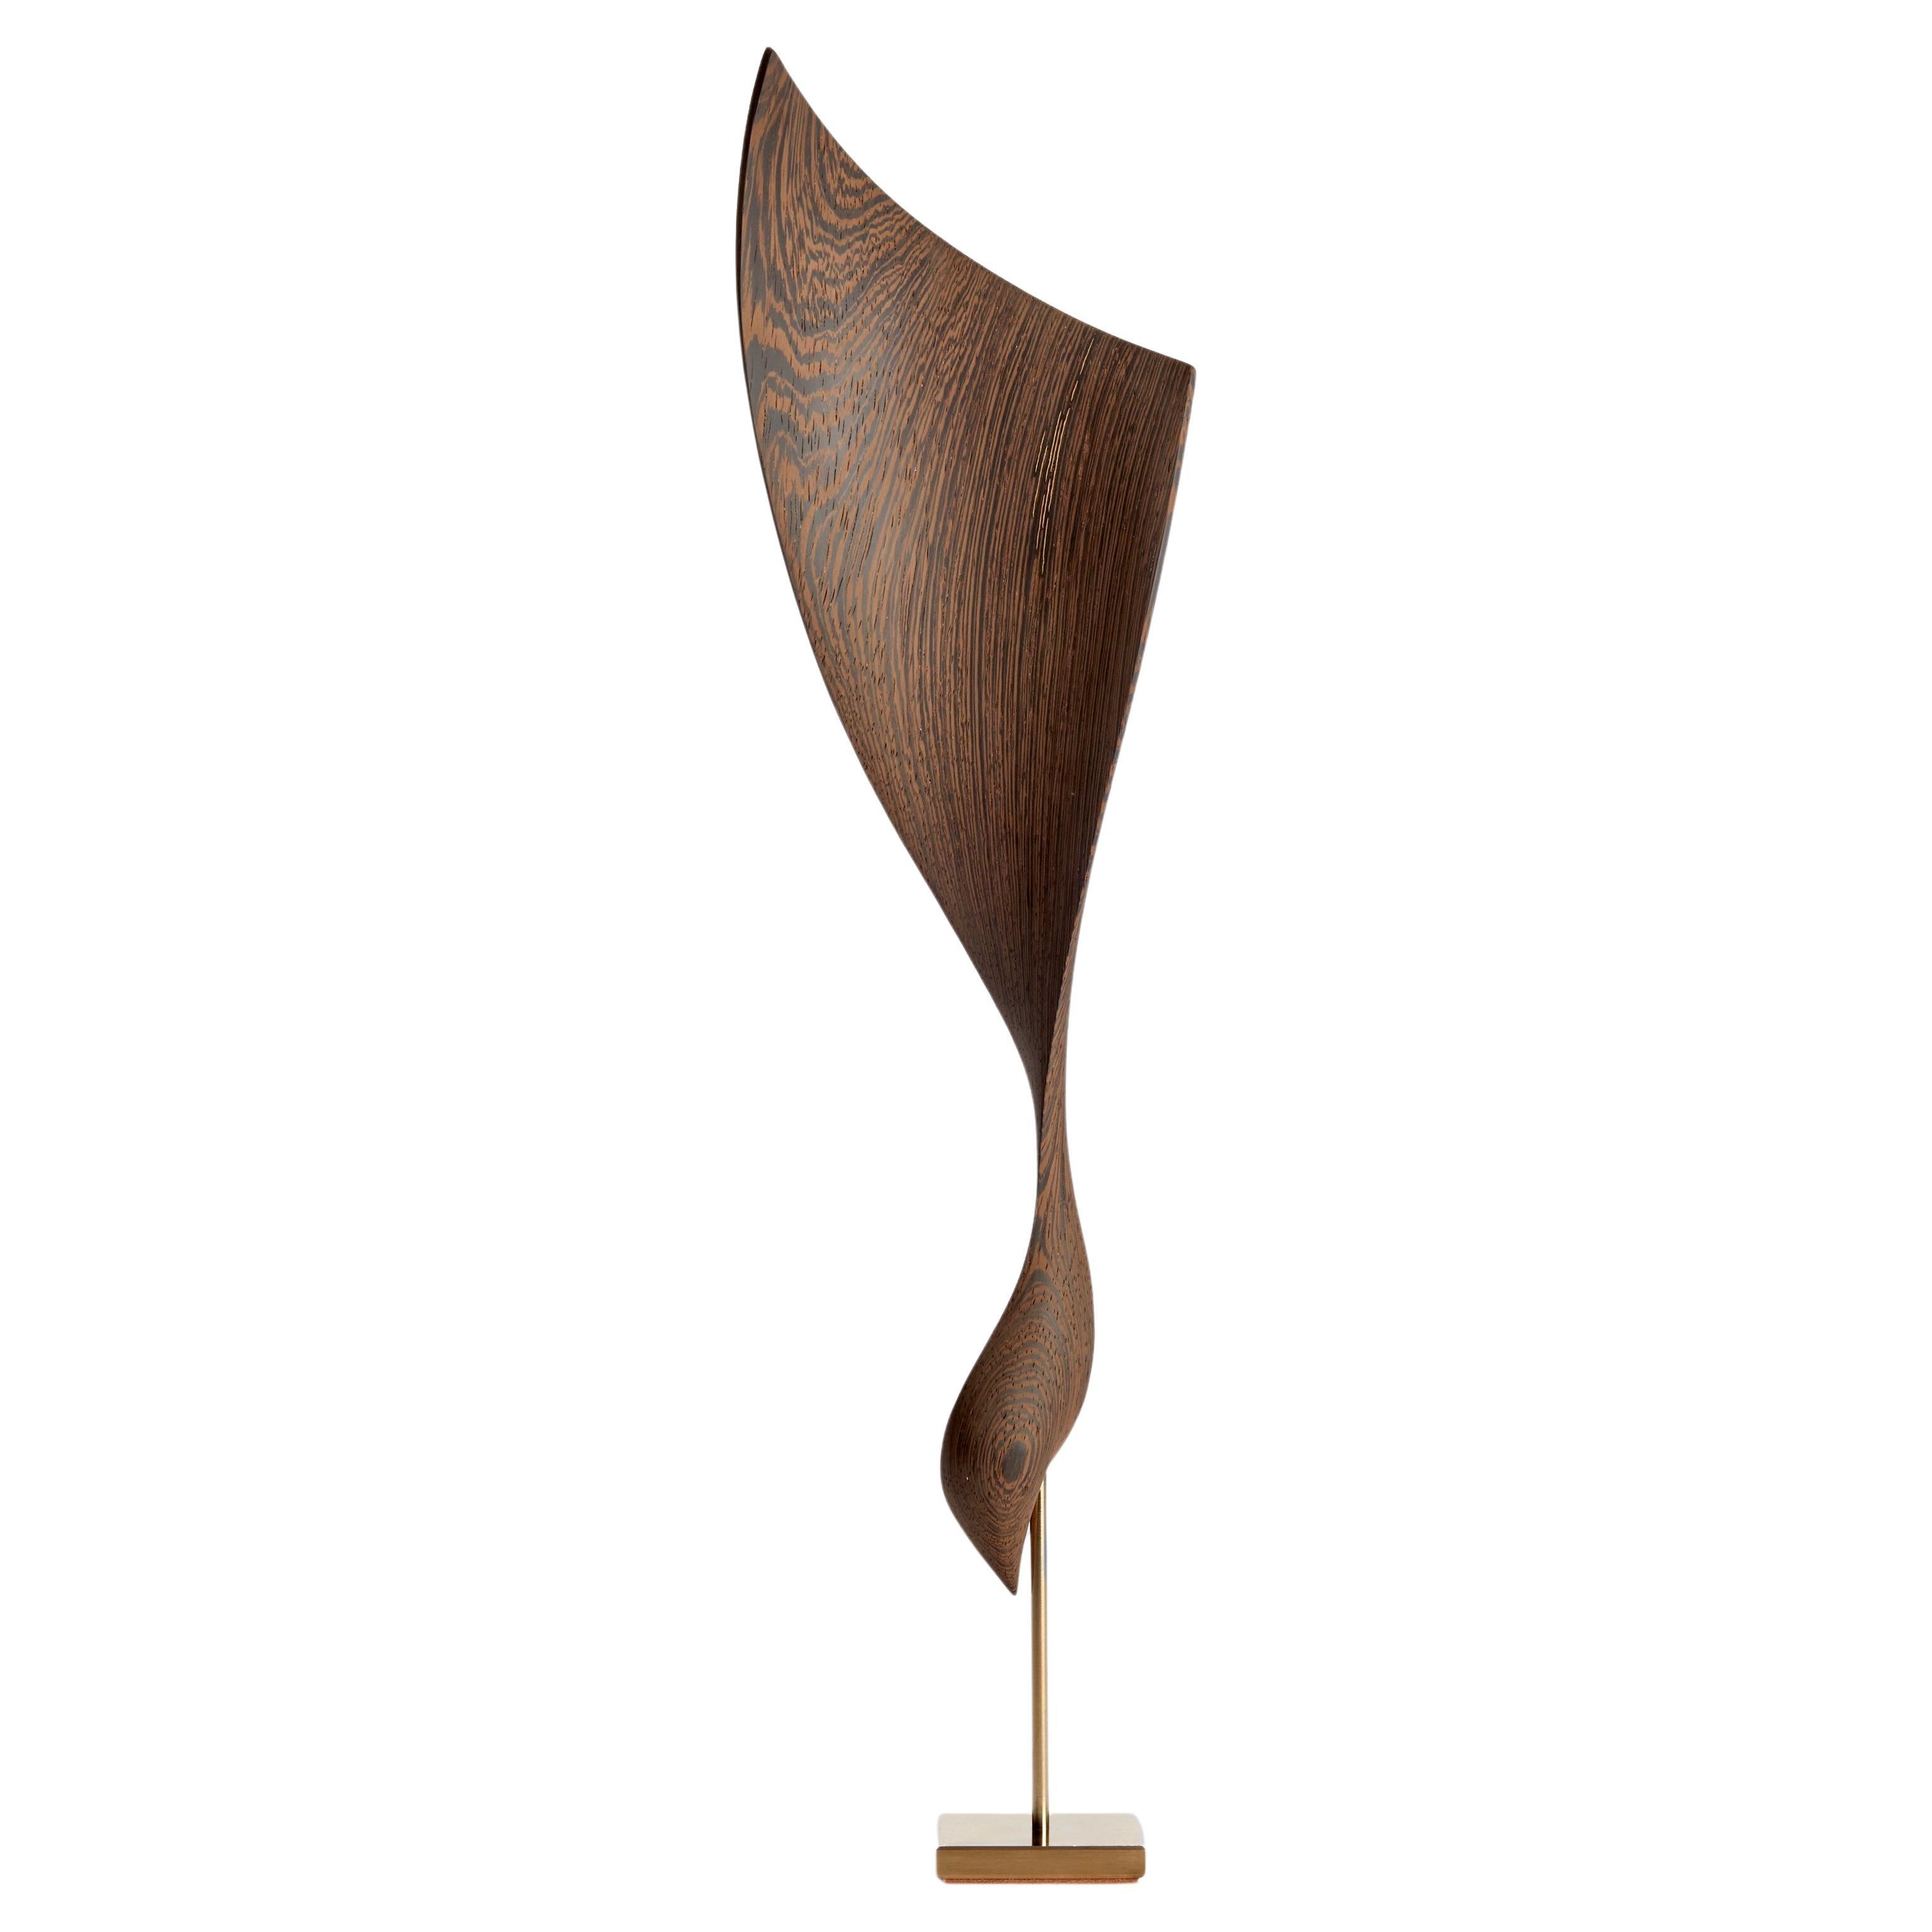 Flow Petit No 21, Wenge wood & gold abstract fluid mounted sculpture by Egeværk